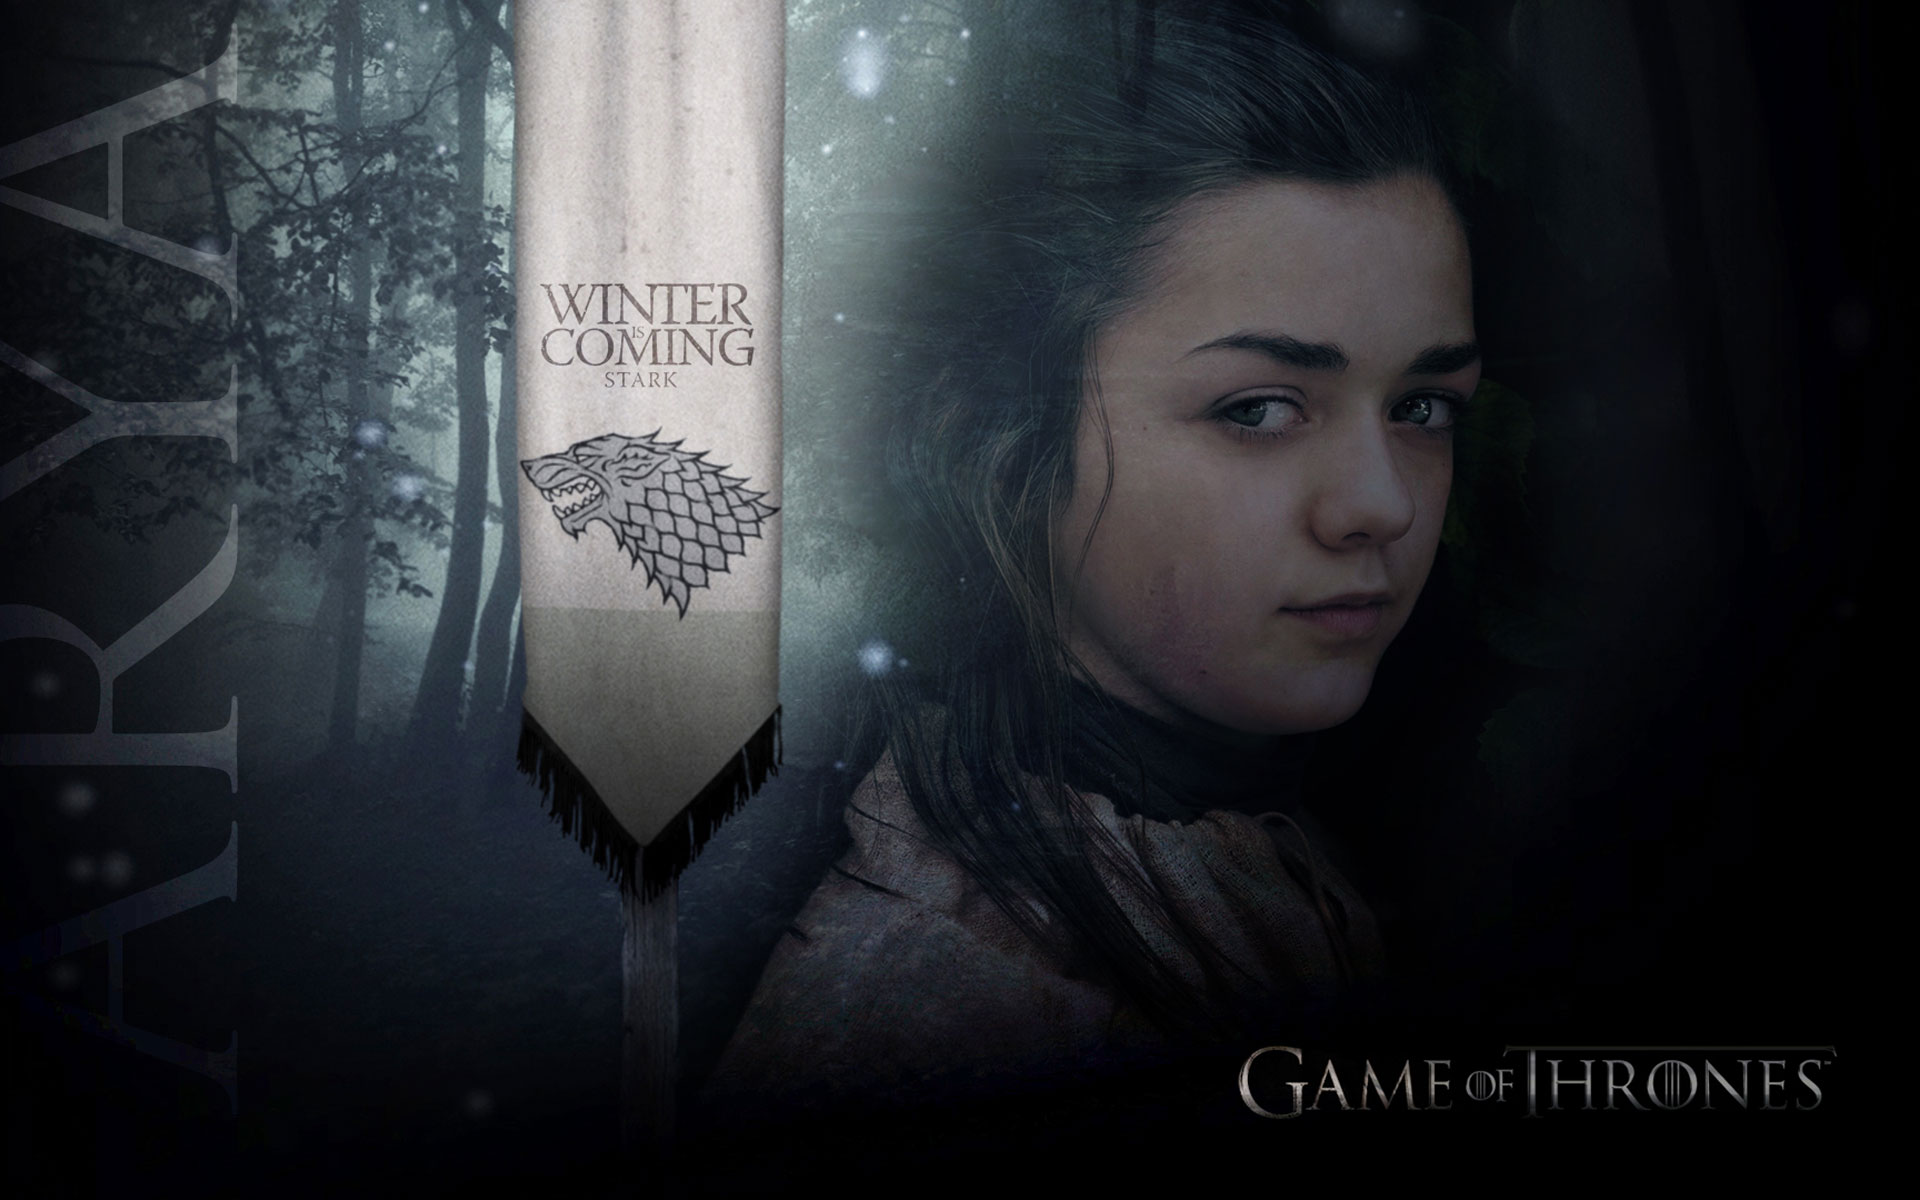 Game Of Thrones Hd Wallpapers in Games Imagescicom